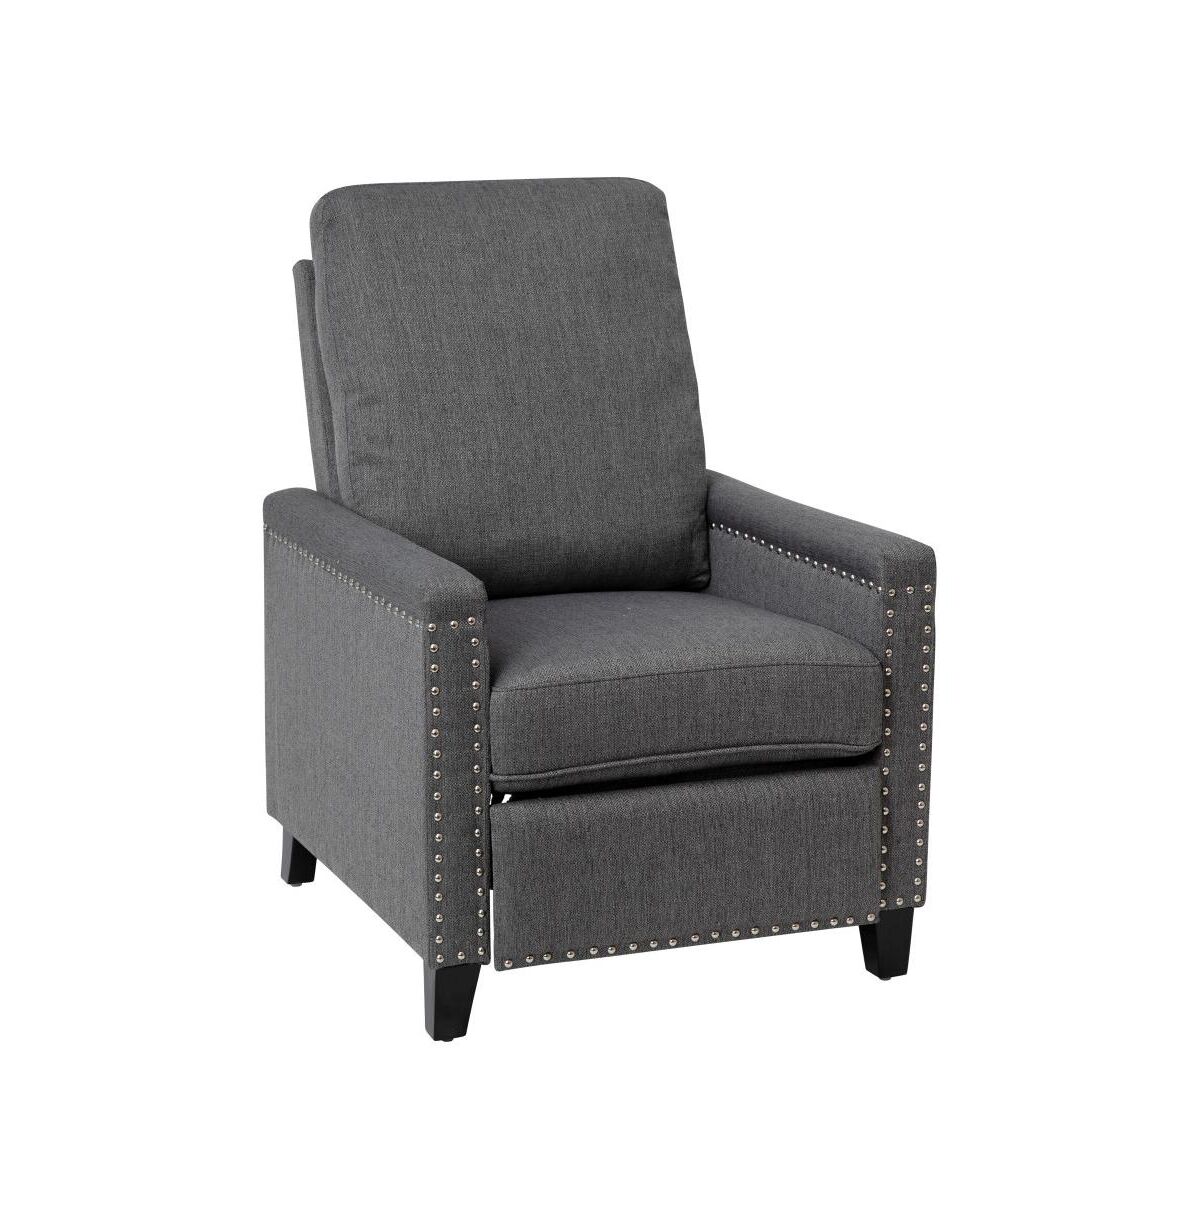 Merrick Lane Renza Transitional Pushback Recliner With Pillow Style Back And Accent Nail Trim - Manual Recliner - Gray